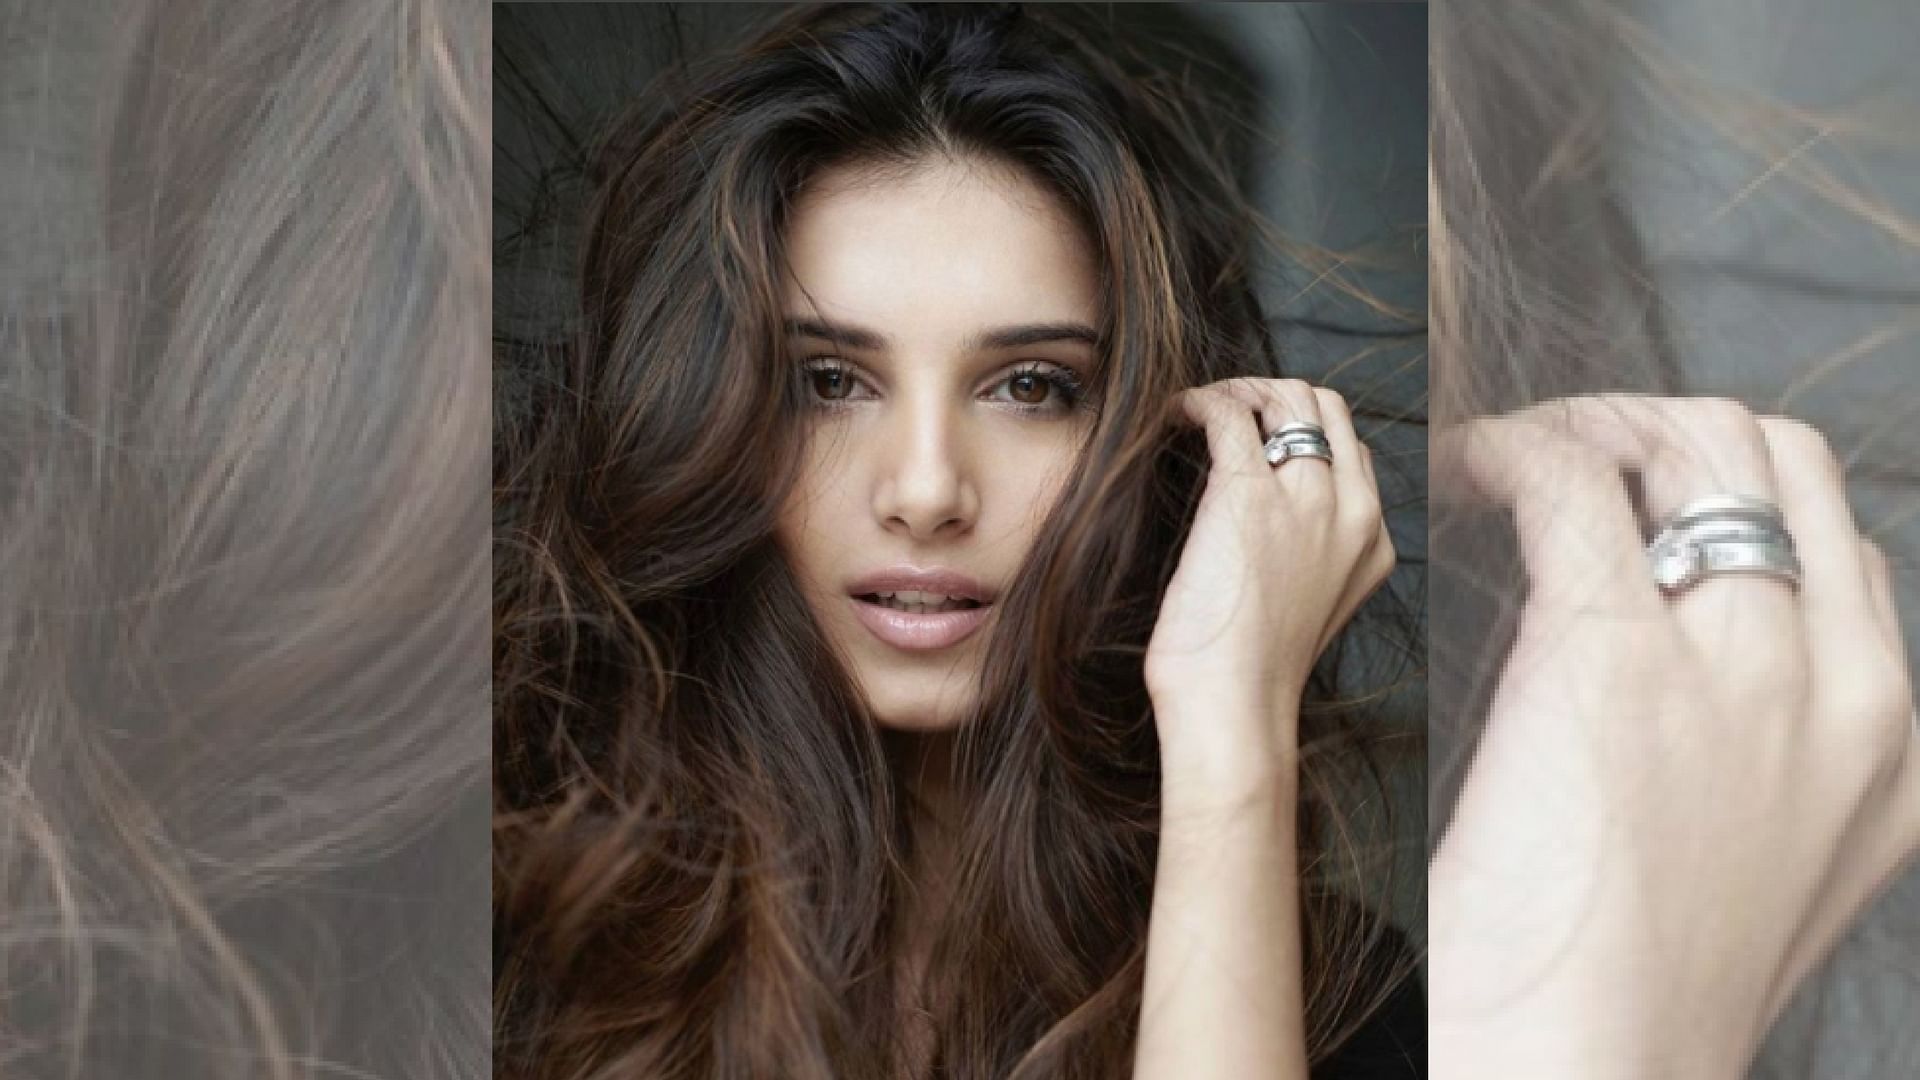 Tara Sutaria is ready to make her Bollywood debut with<i> Student of the Year 2</i>.